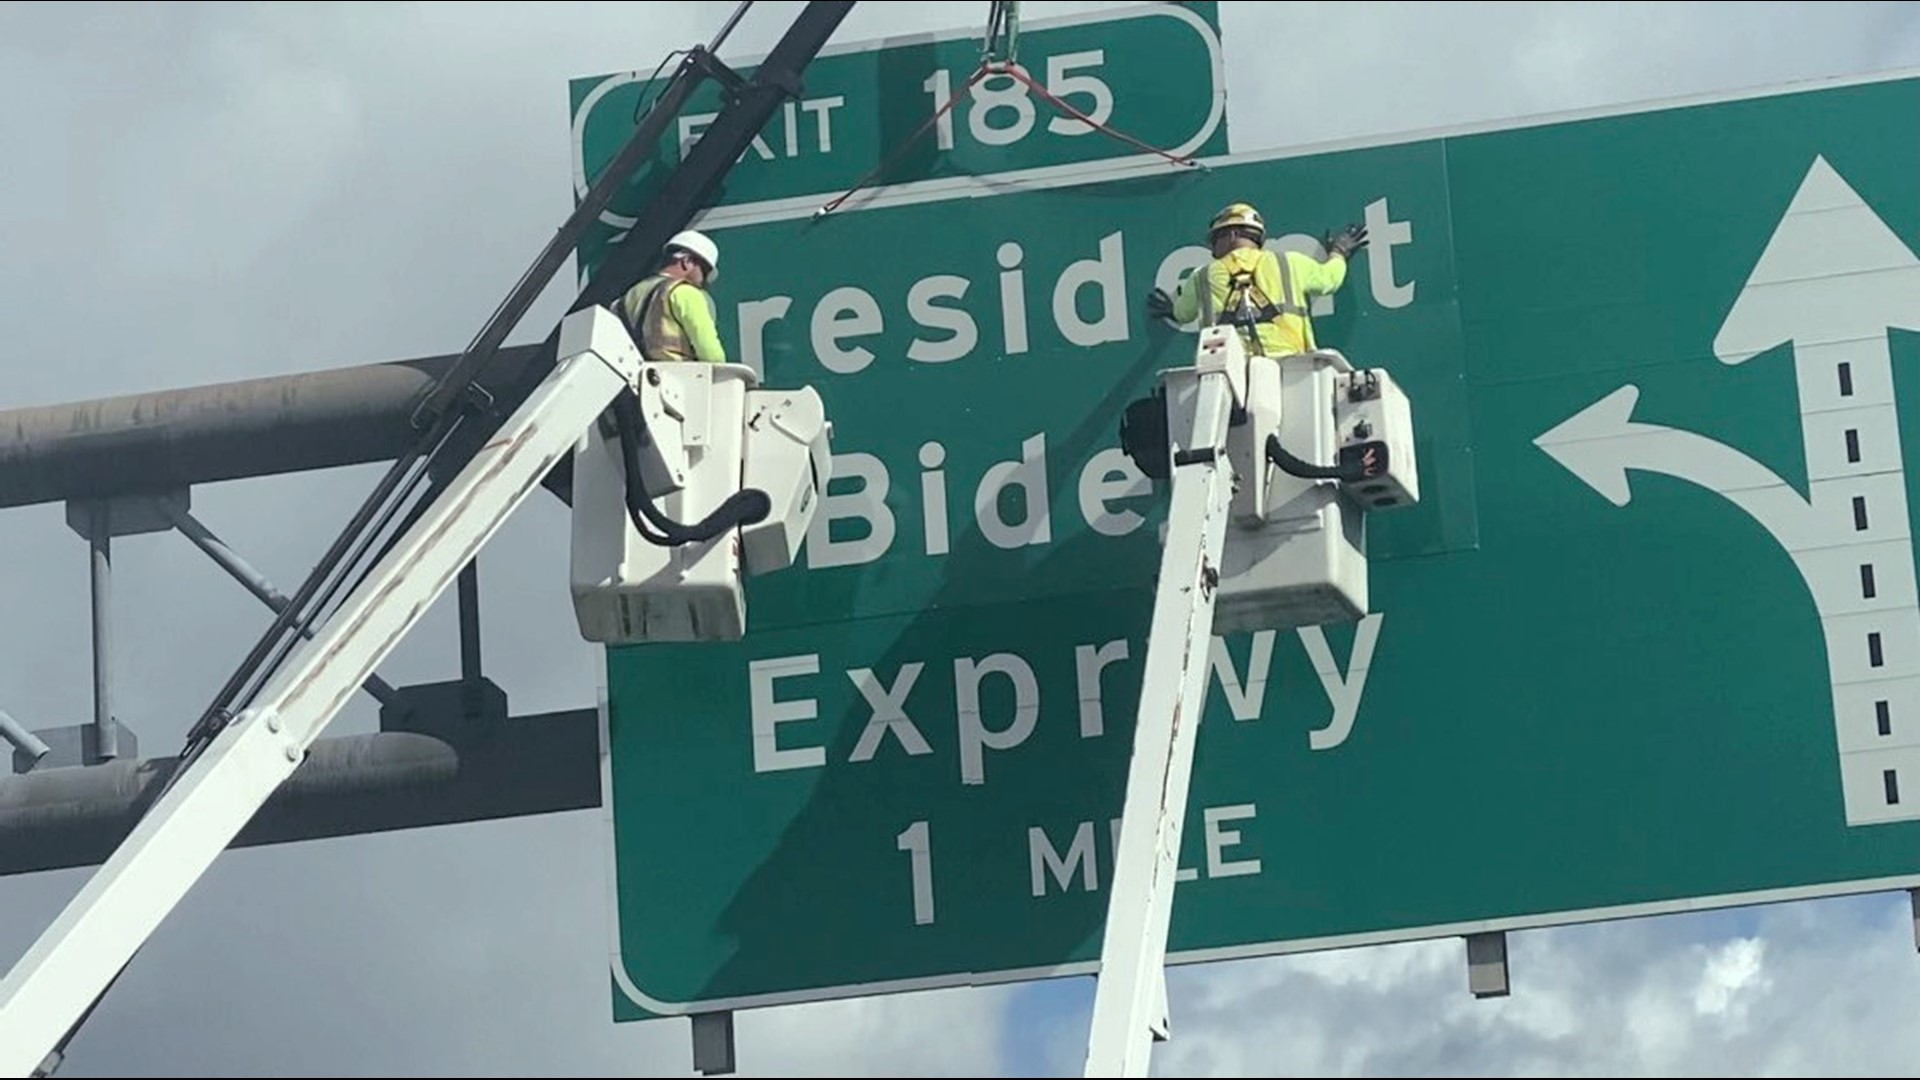 PennDOT is replacing Central Scranton Expressway signs with new "President Biden Expressway" signs on I-81 in Scranton.